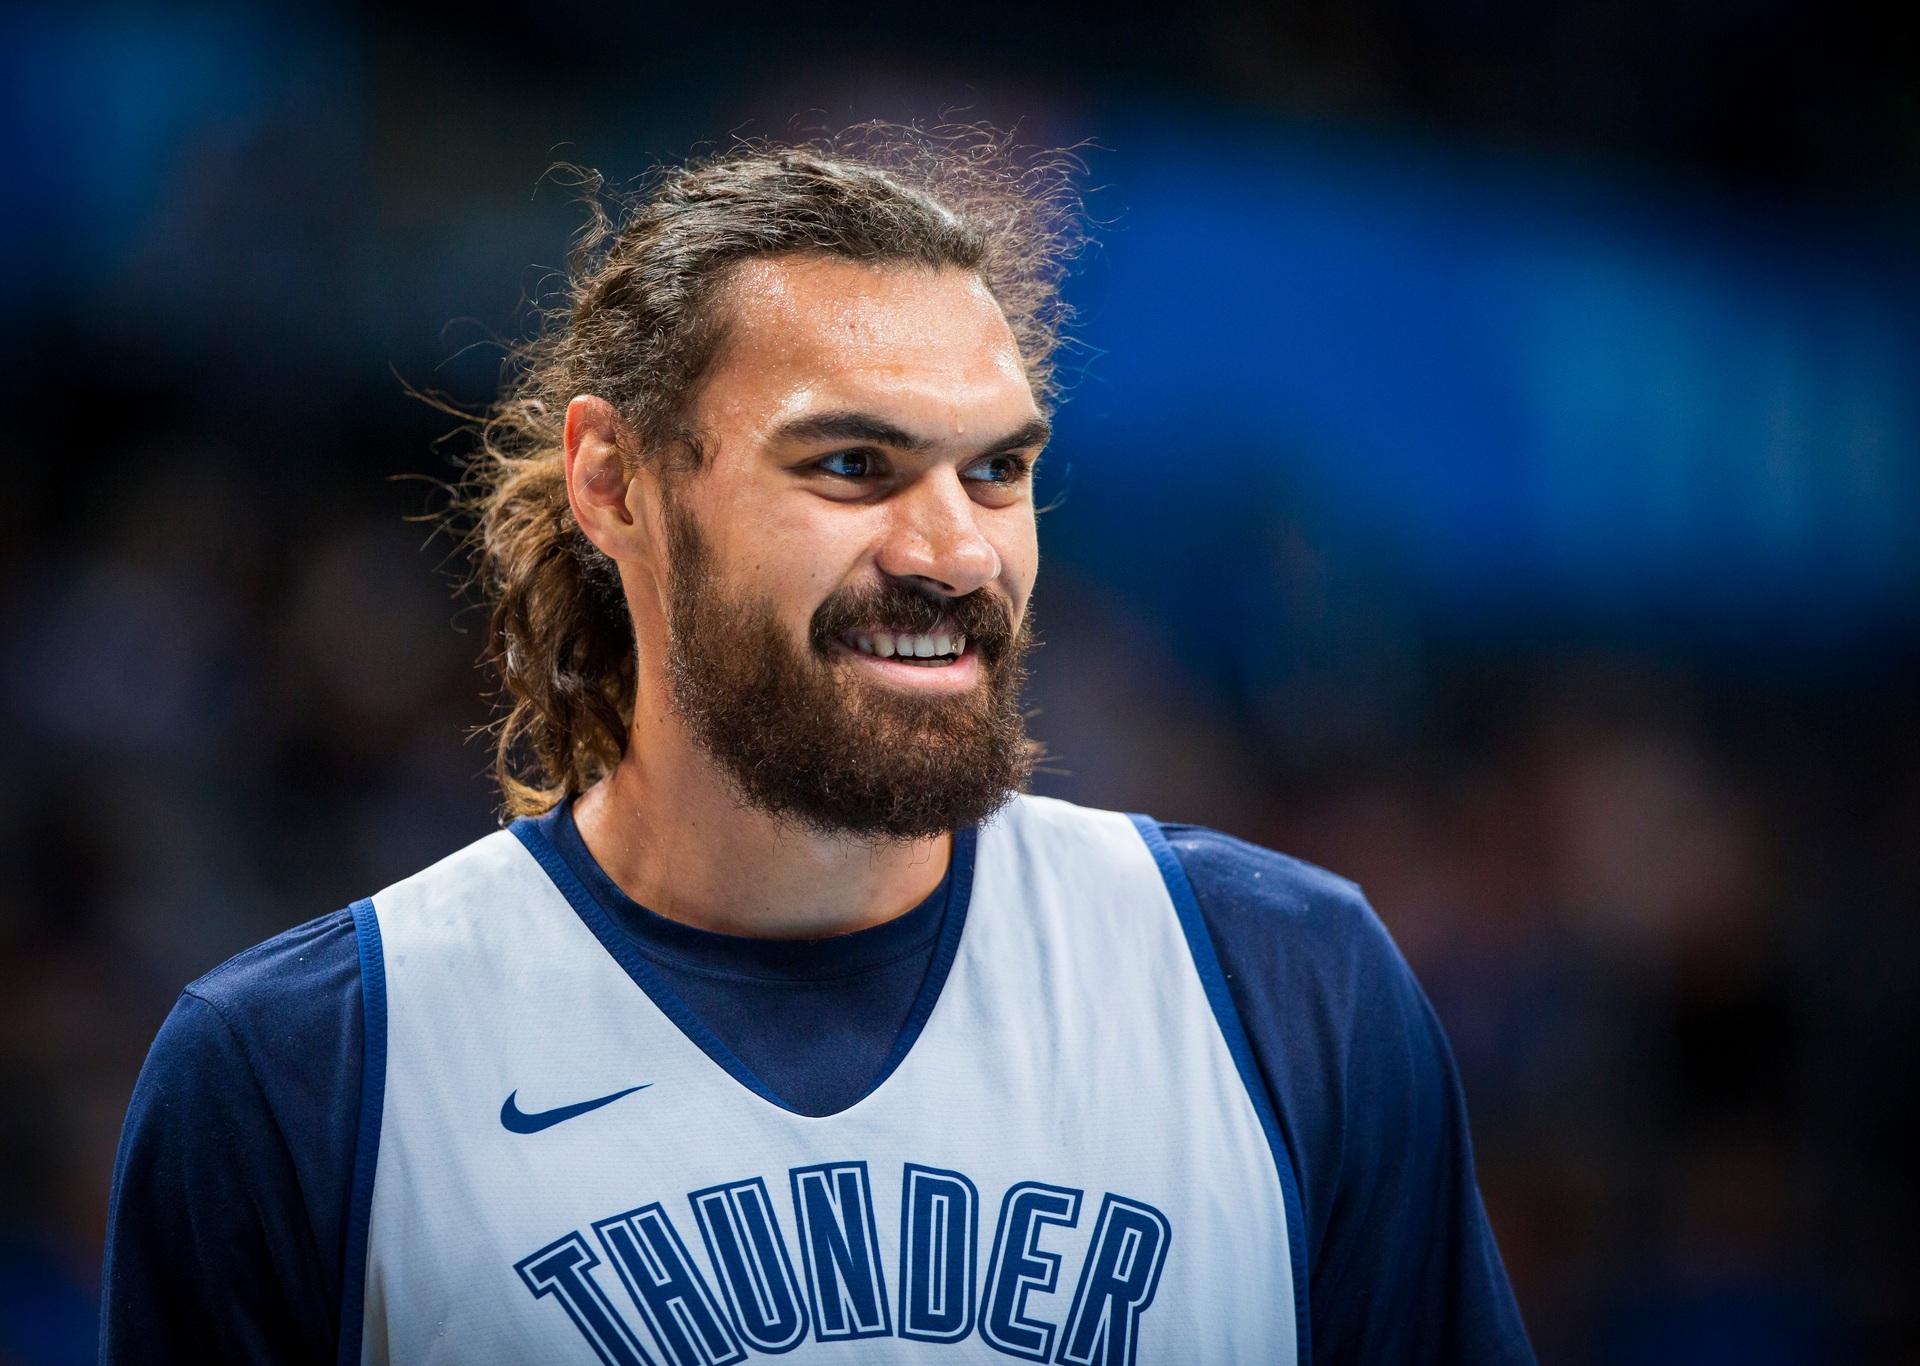 Basketball: Steven Adams remains uncommitted over potential Tall